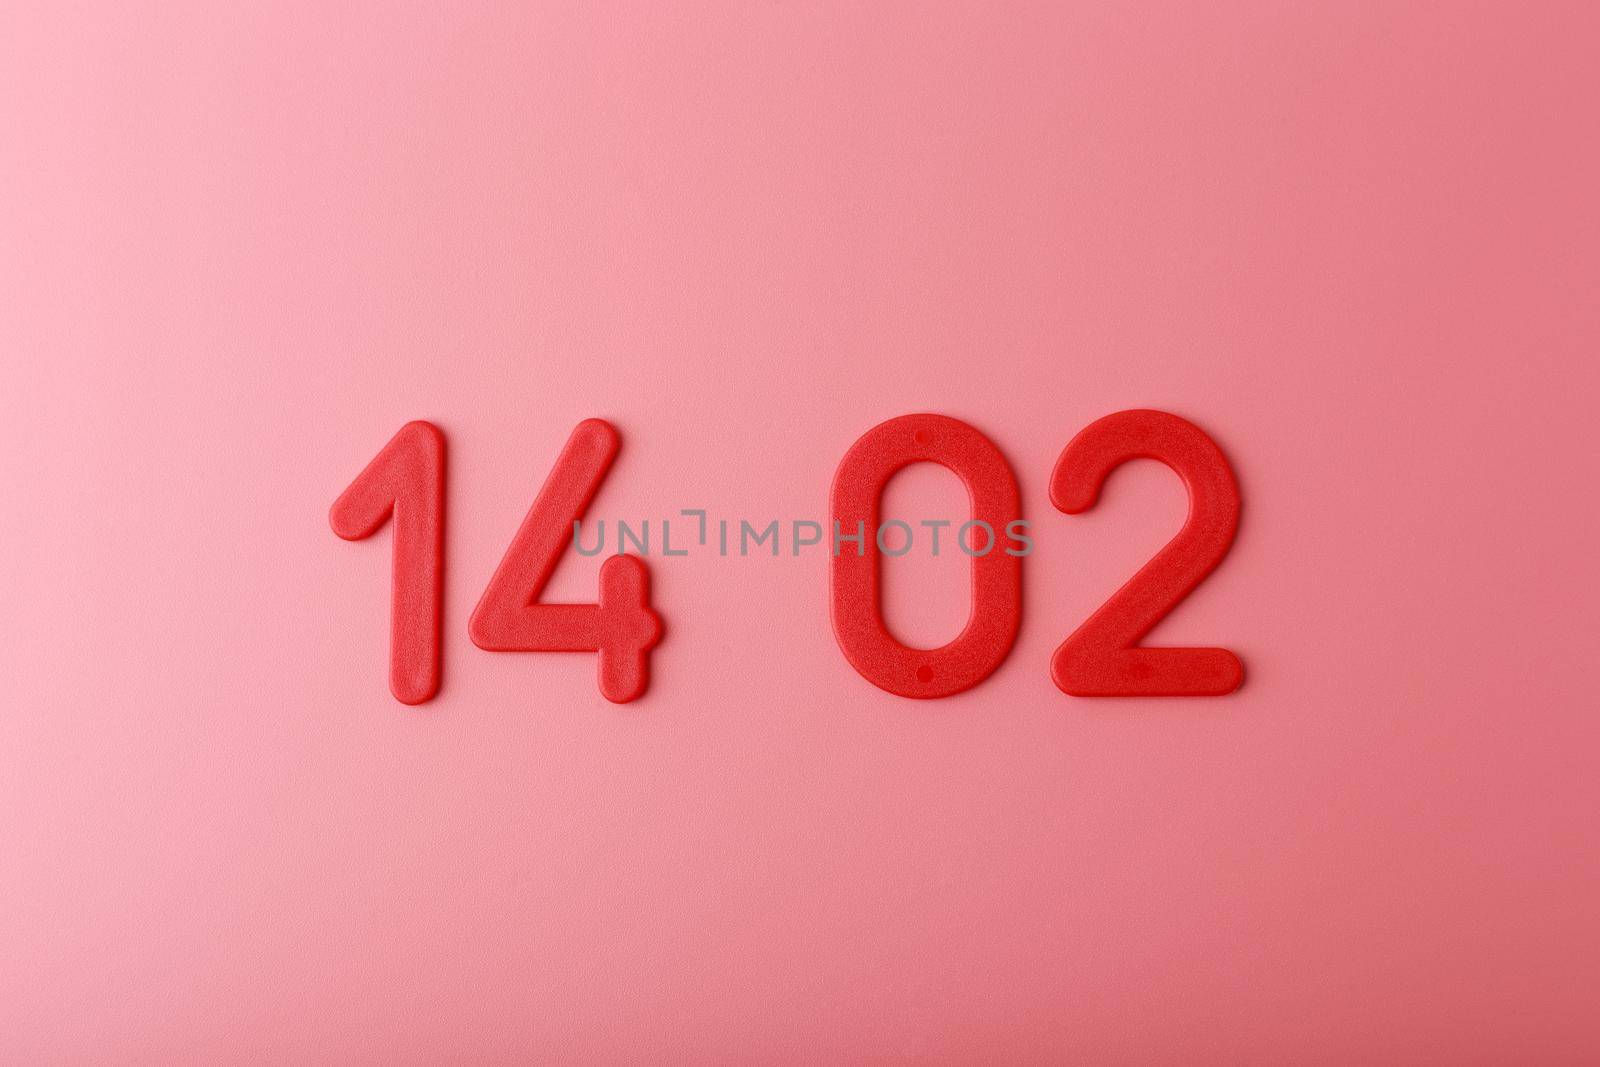 Red numbers 14 02 on bright pink background. Concept of Happy Valentine's day  by Senorina_Irina